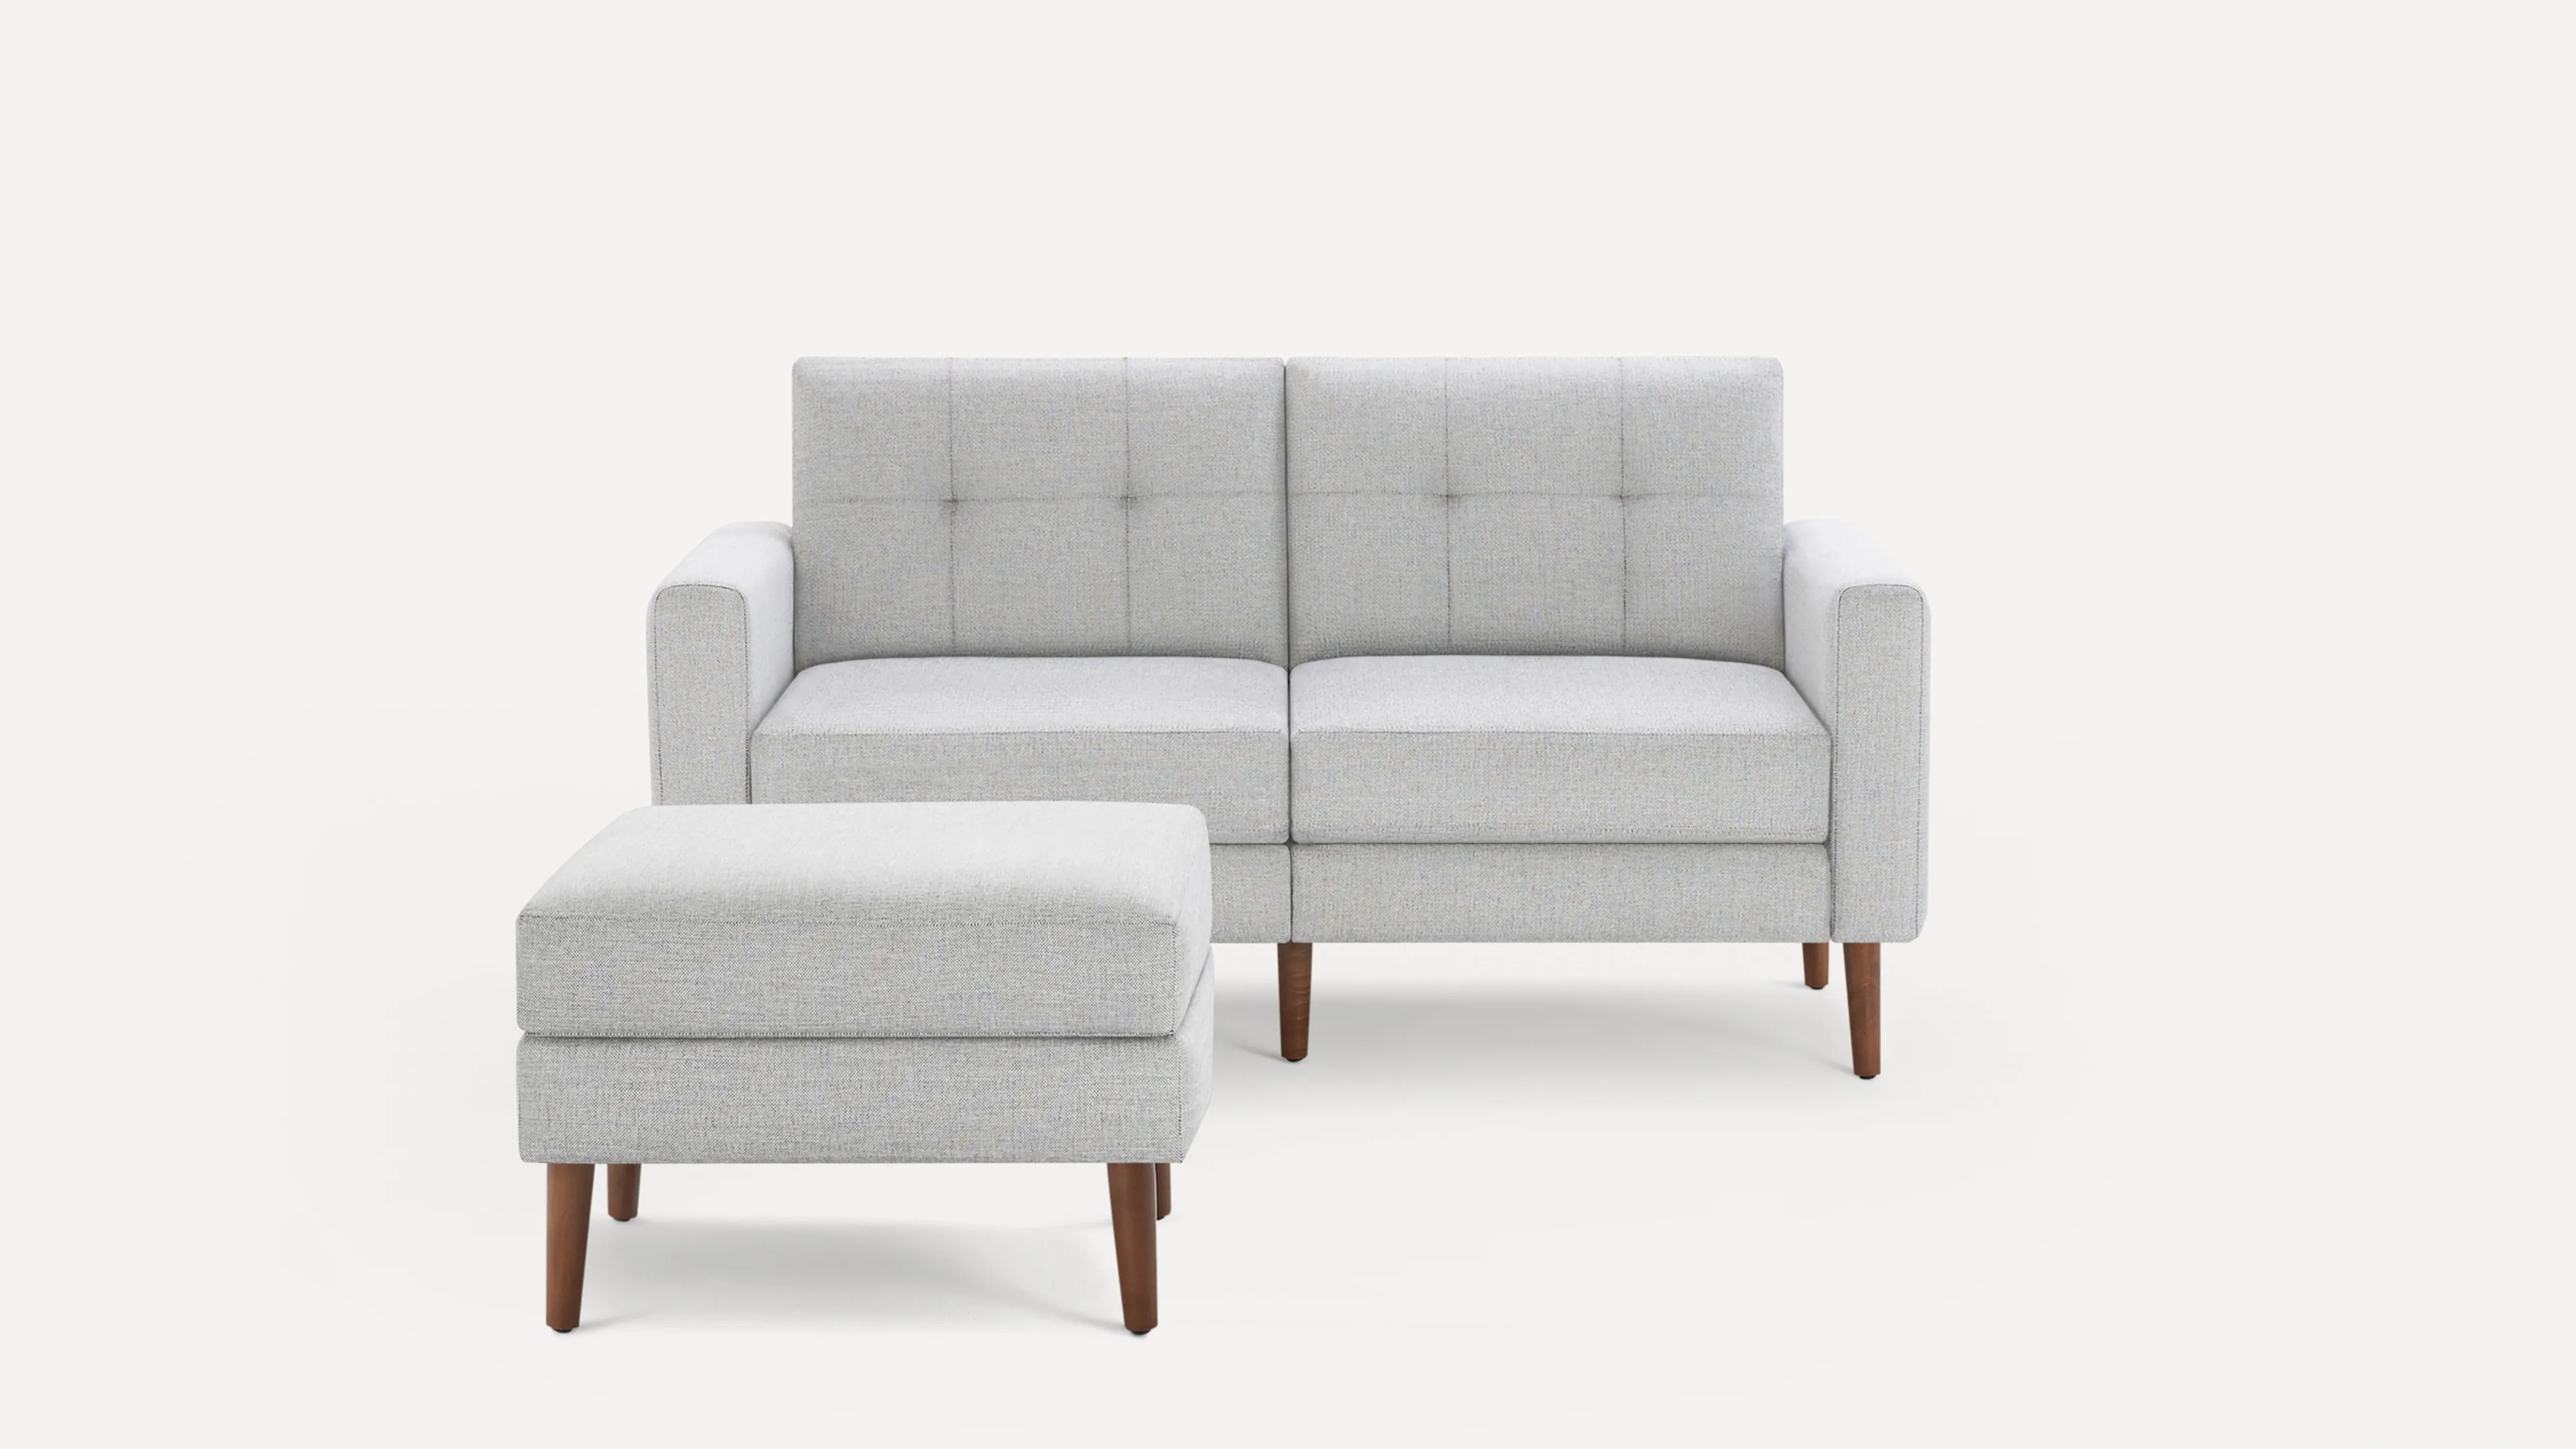 Original Nomad Loveseat with Ottoman in Crushed Gravel Fabric